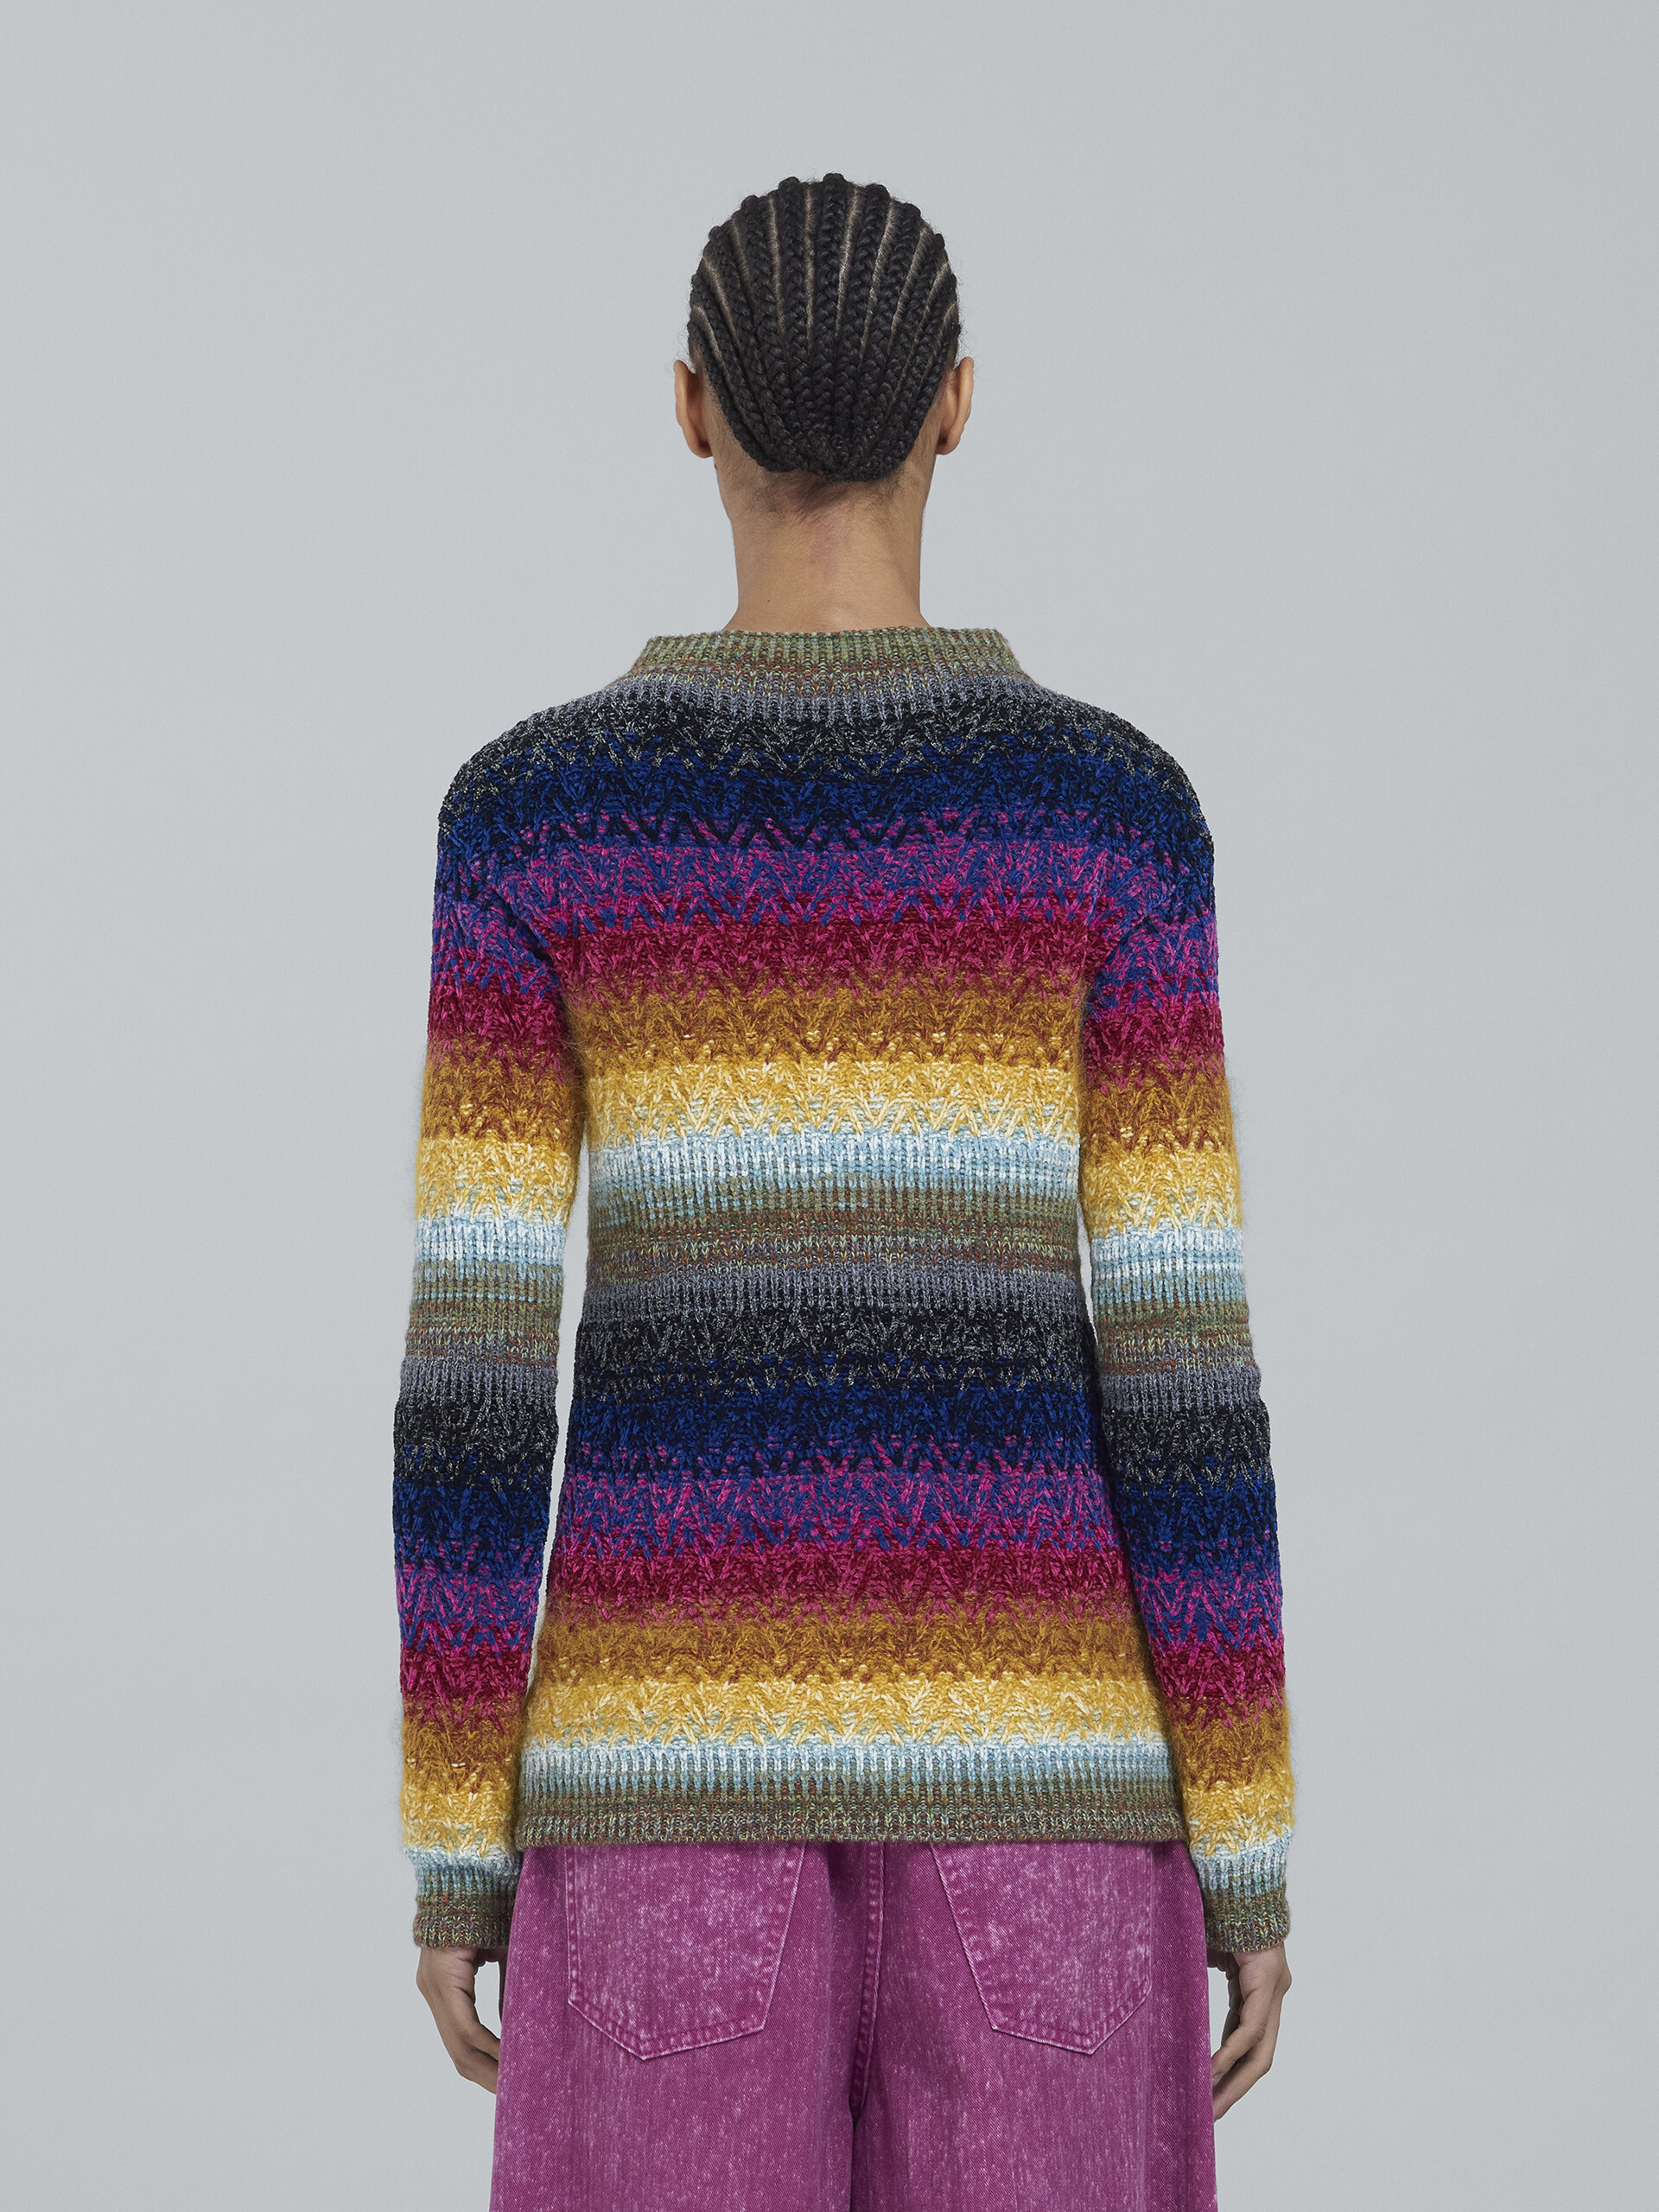 Viscose cotton and wool sweater - Pullovers - Image 3